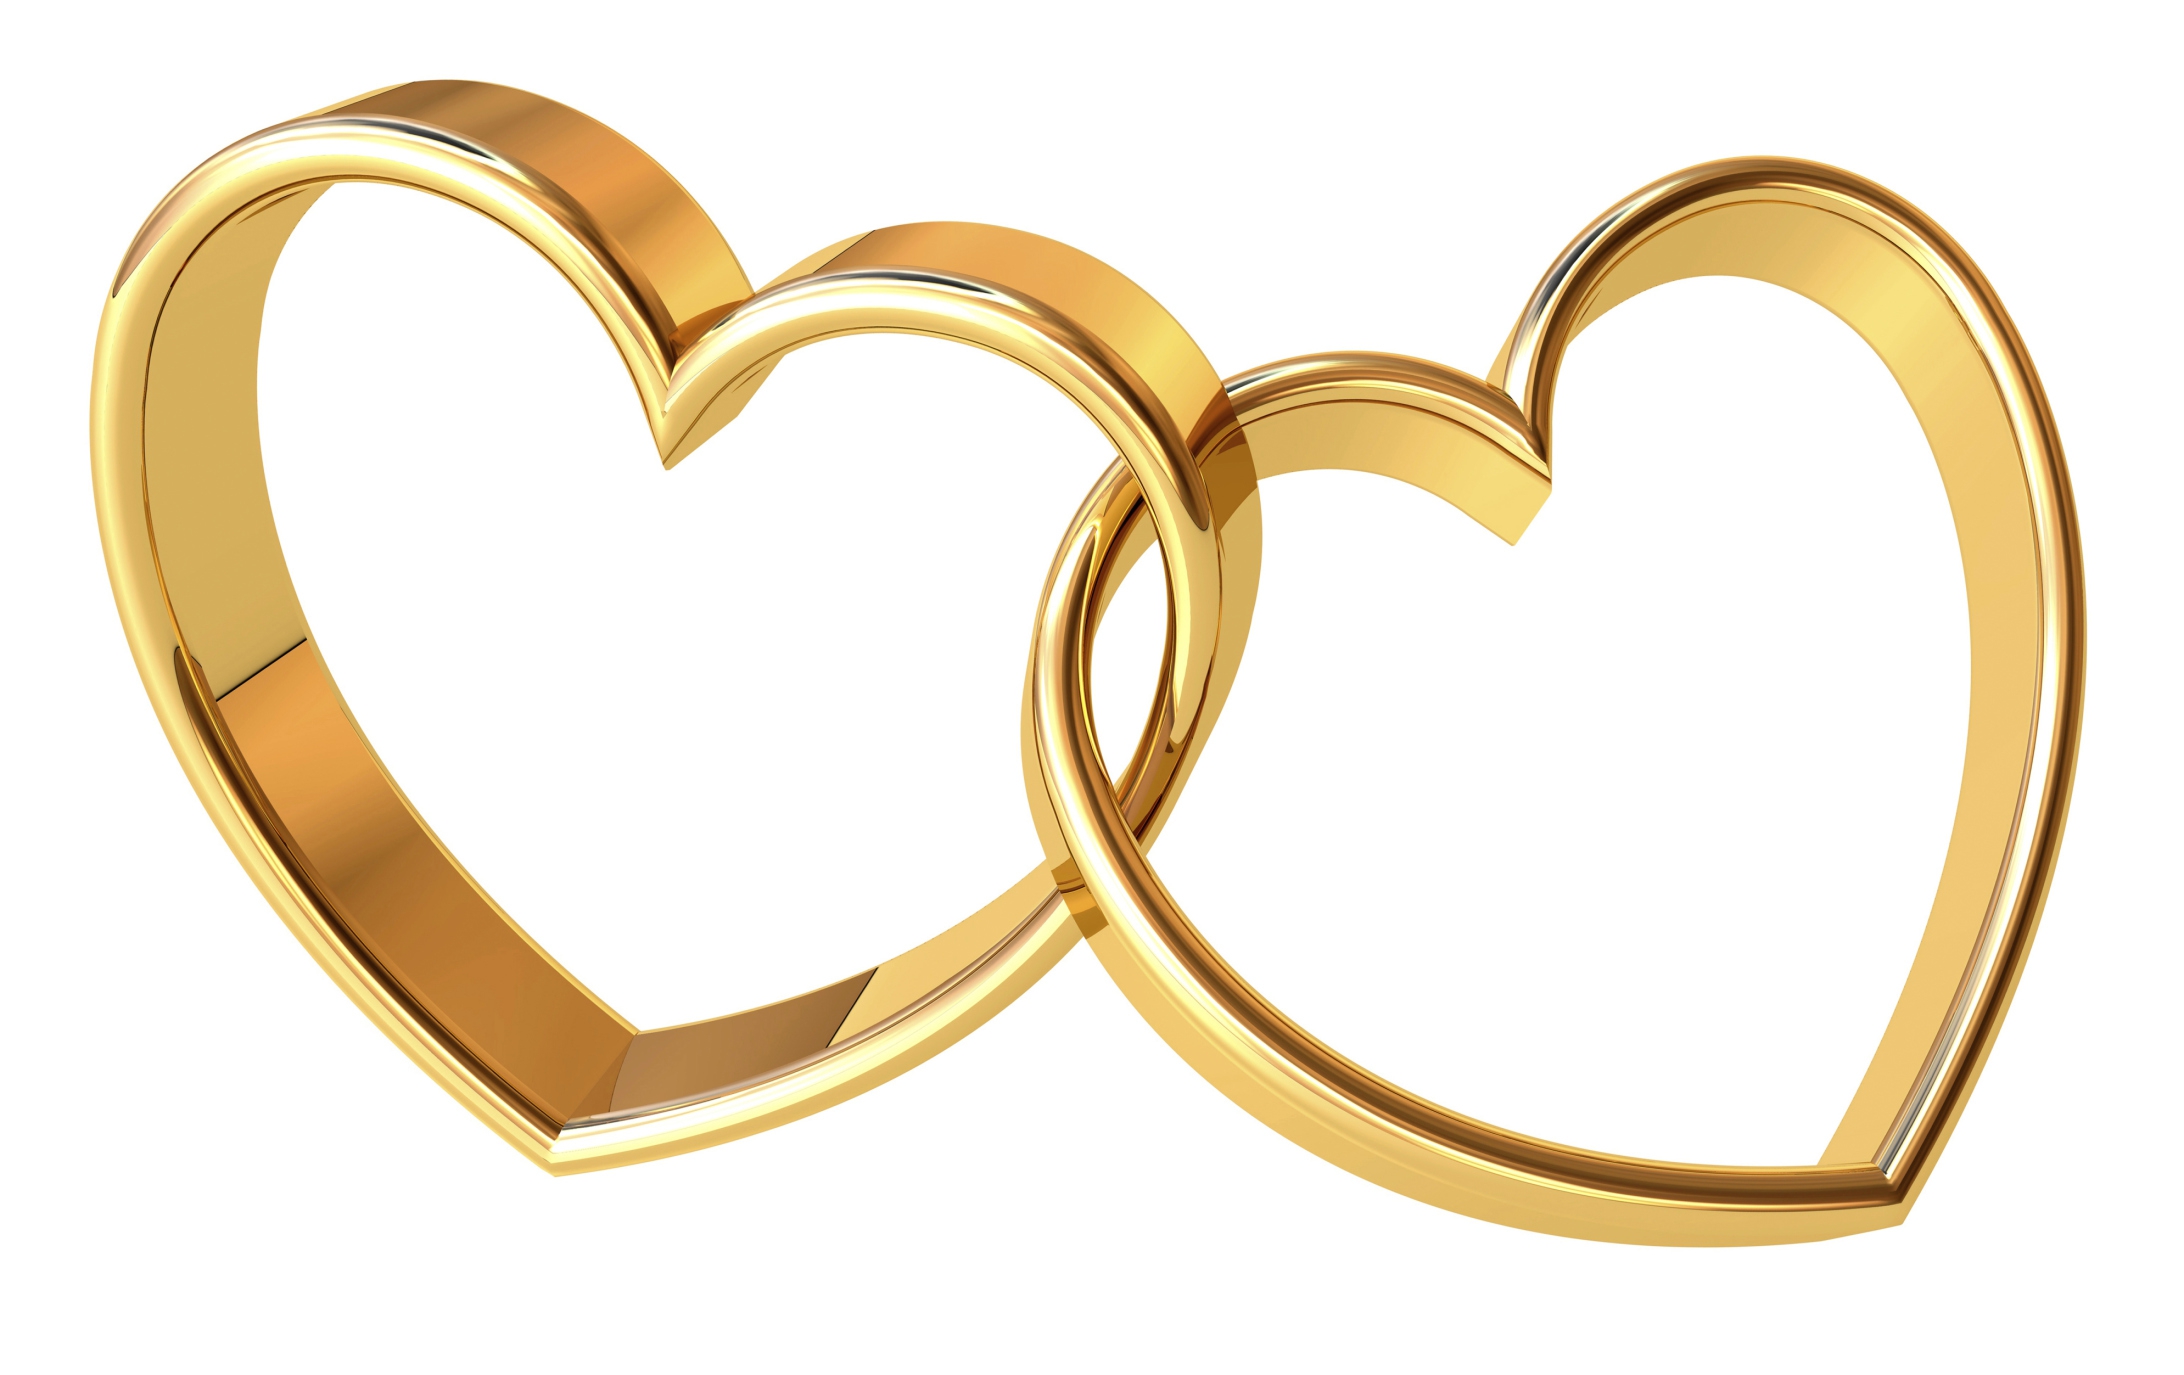 Entwined wedding rings clipart.